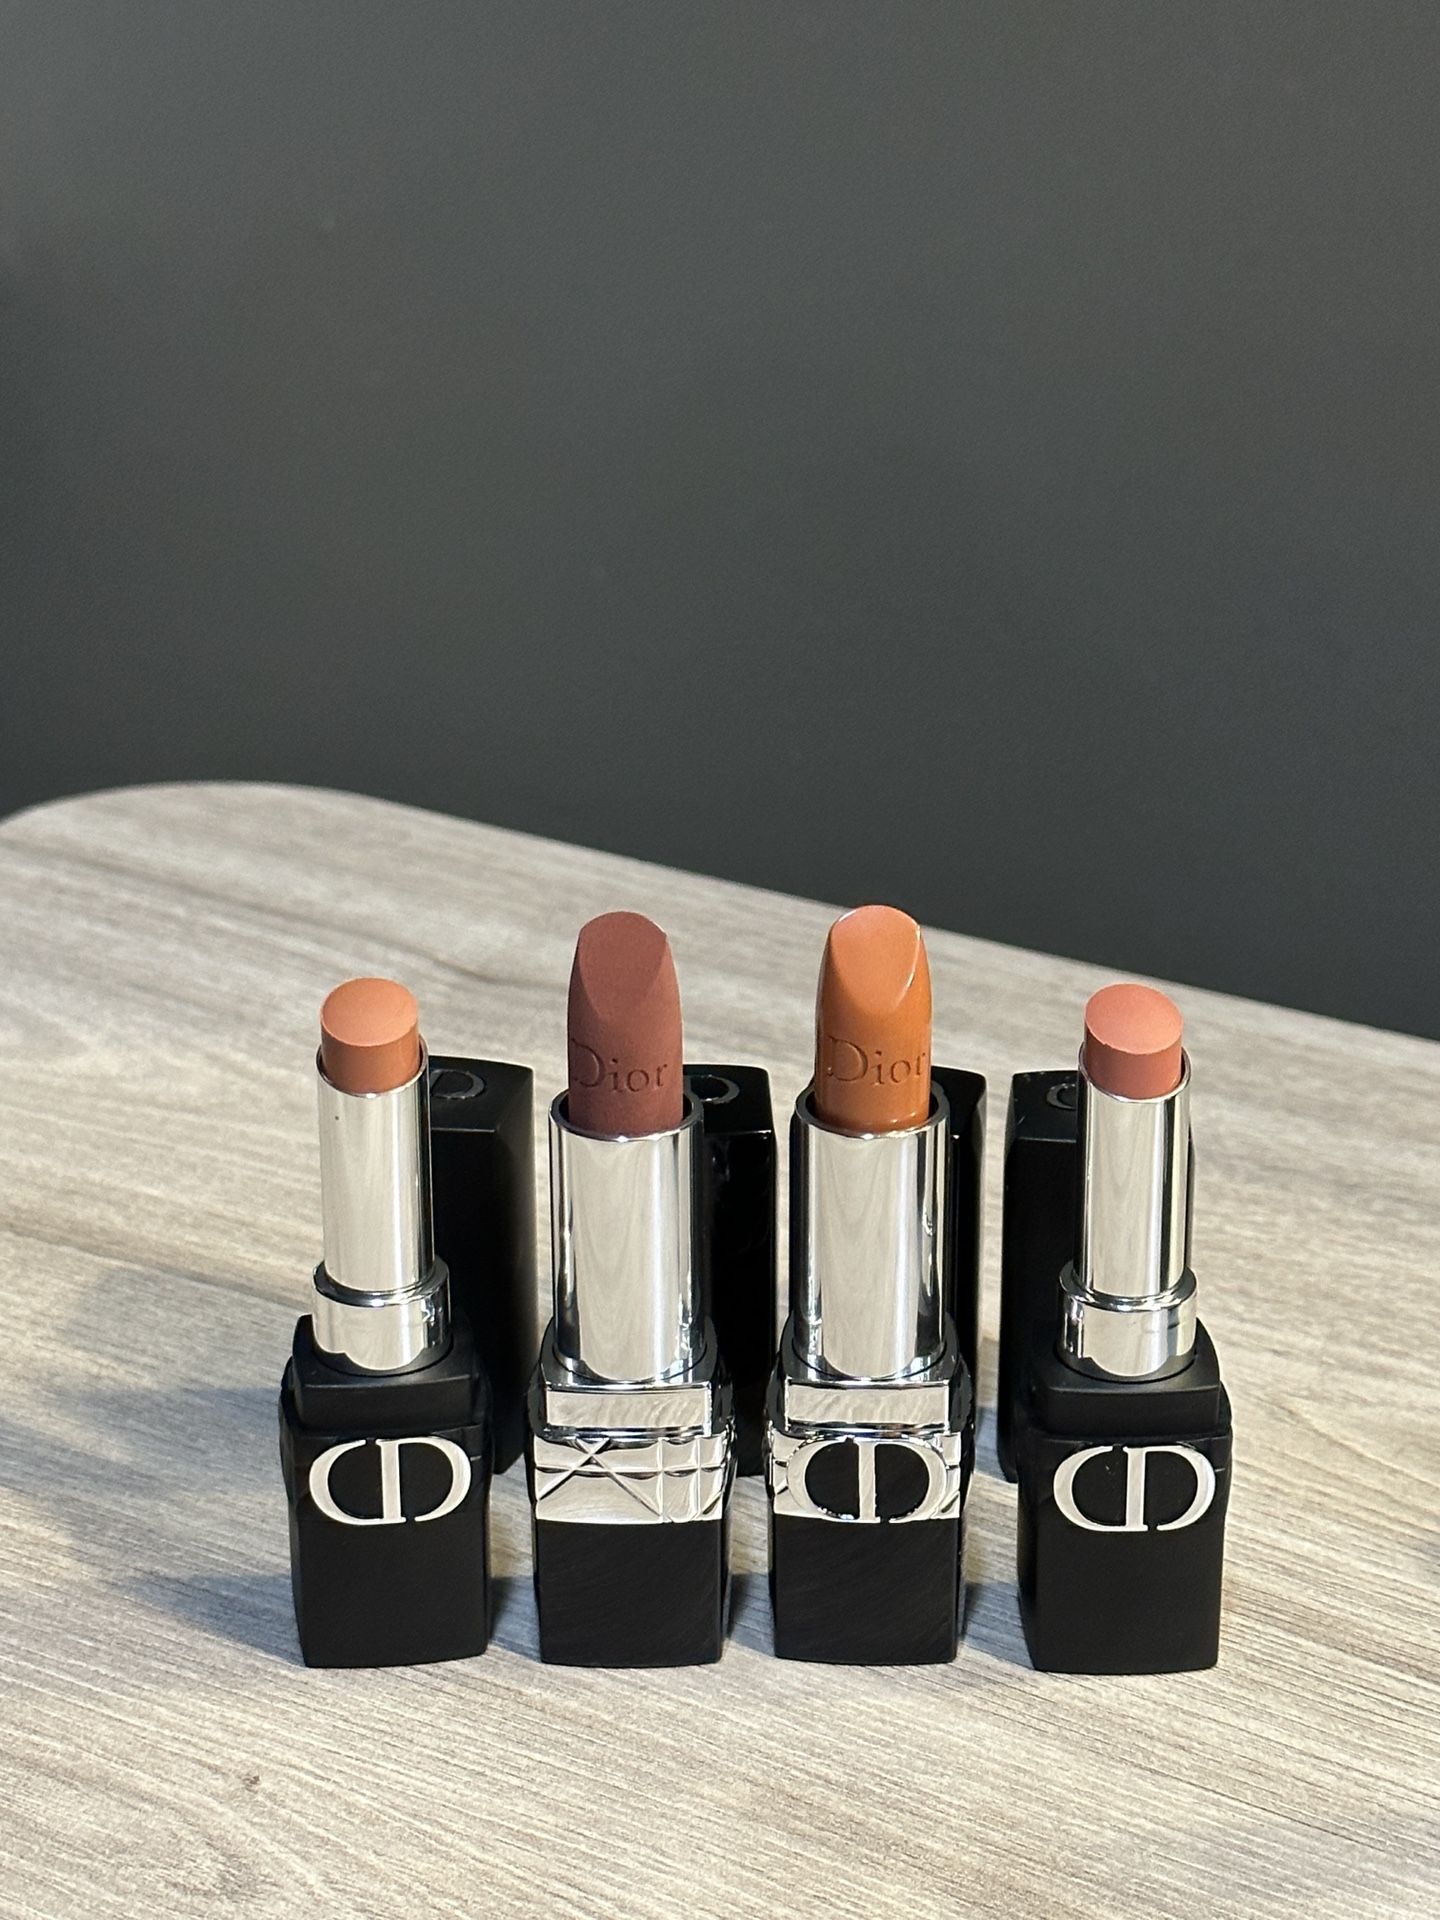 Dior Lipsticks $20 For Each for Sale in Seattle, WA - OfferUp